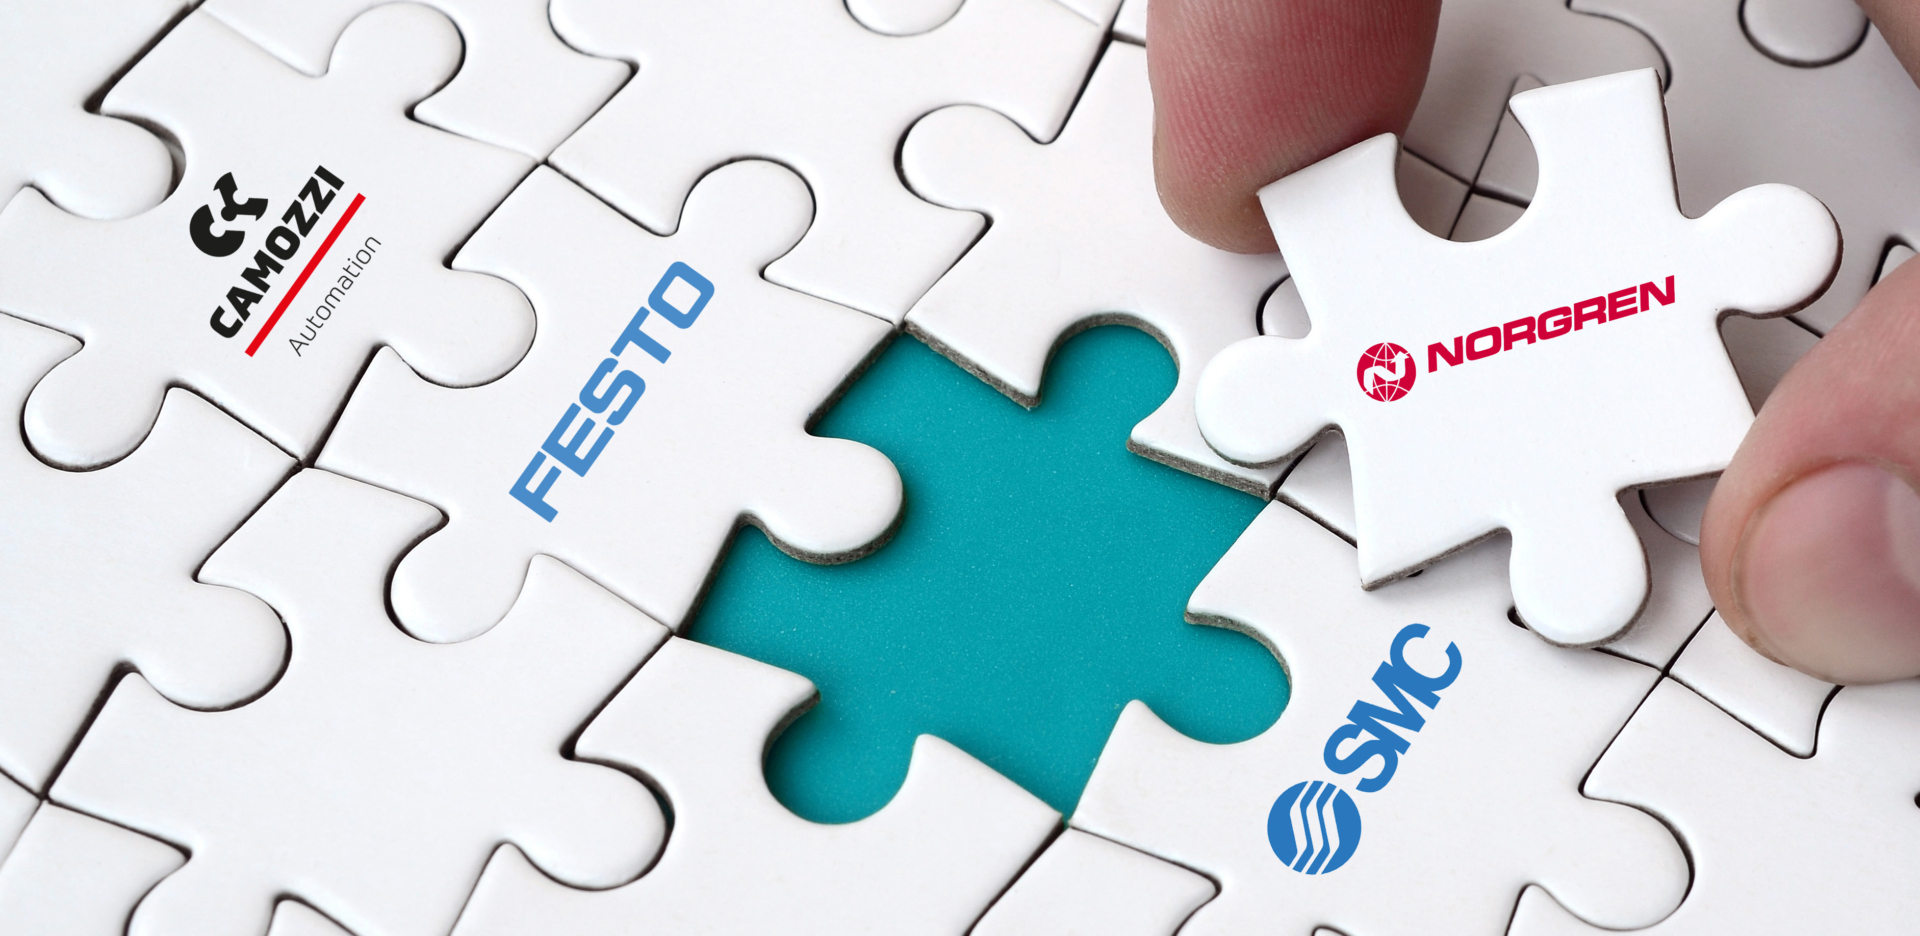 jigsaw puzzle piece with Norgren logo being placed into puzzle